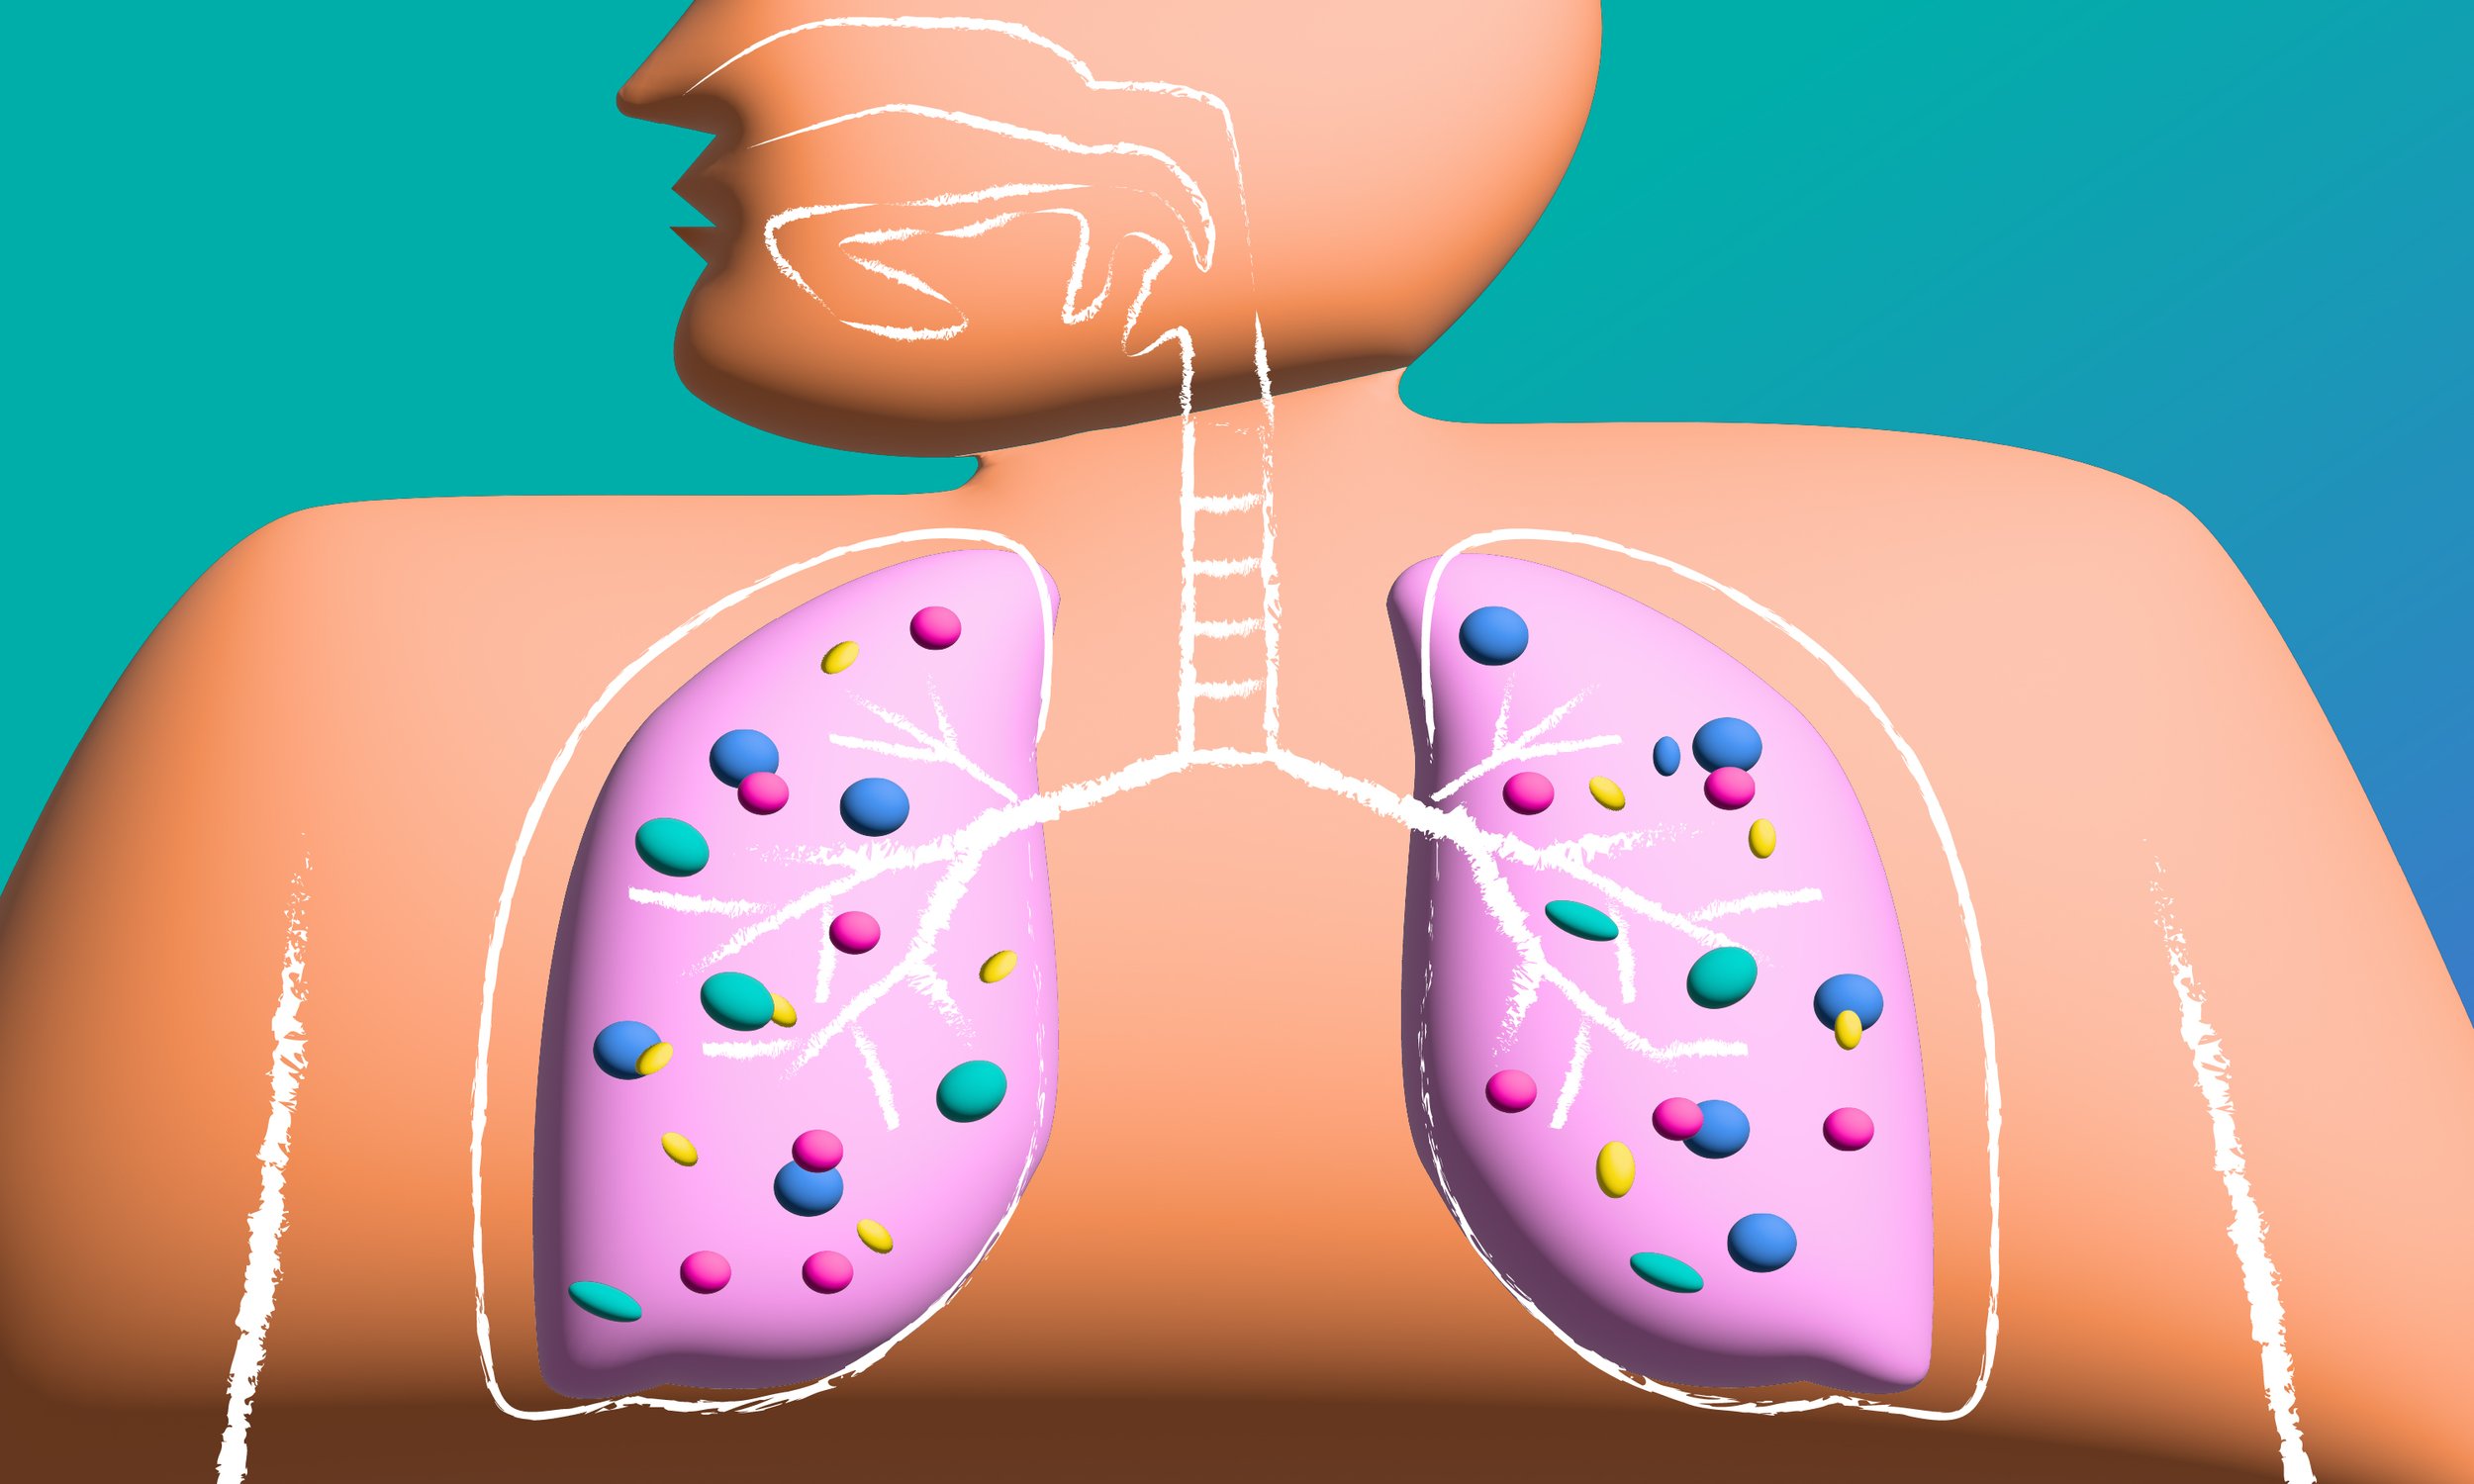 Obese-BMI-Microbiome-Lungs-Airways (1).jpg